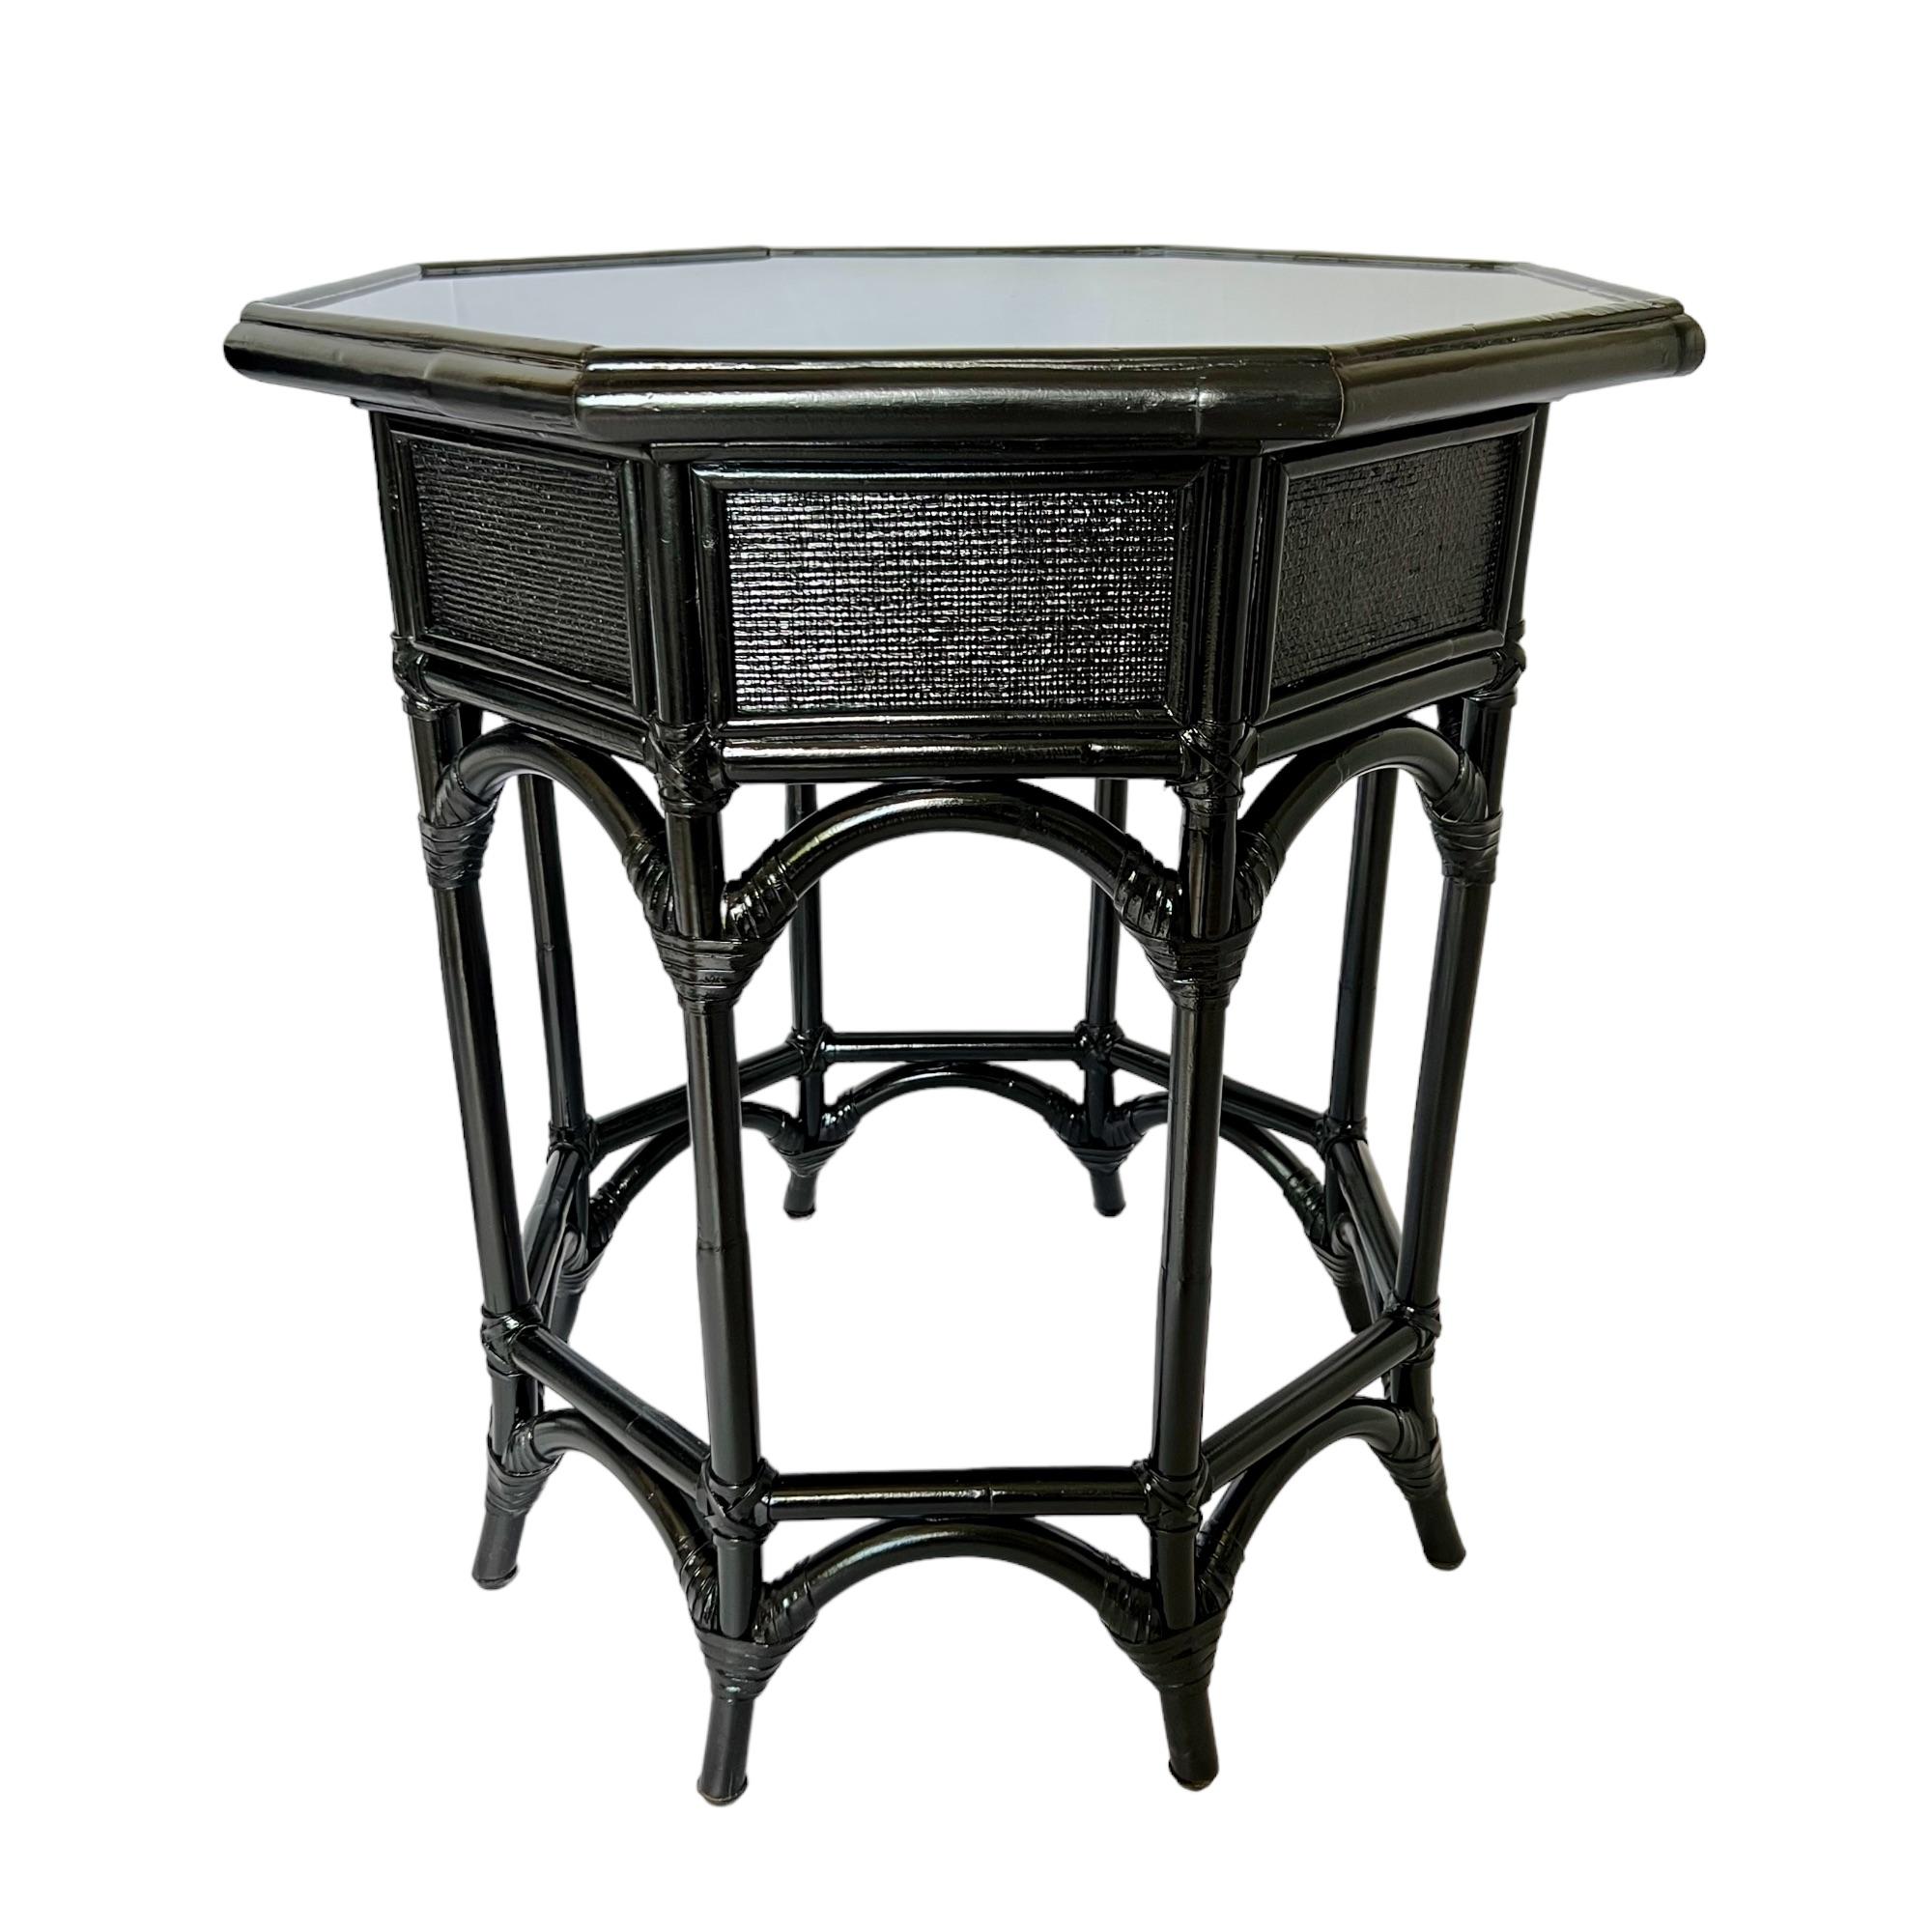 Painted Vintage Refinished Black Rattan Resin Top Octagon Side Tables, a Pair For Sale